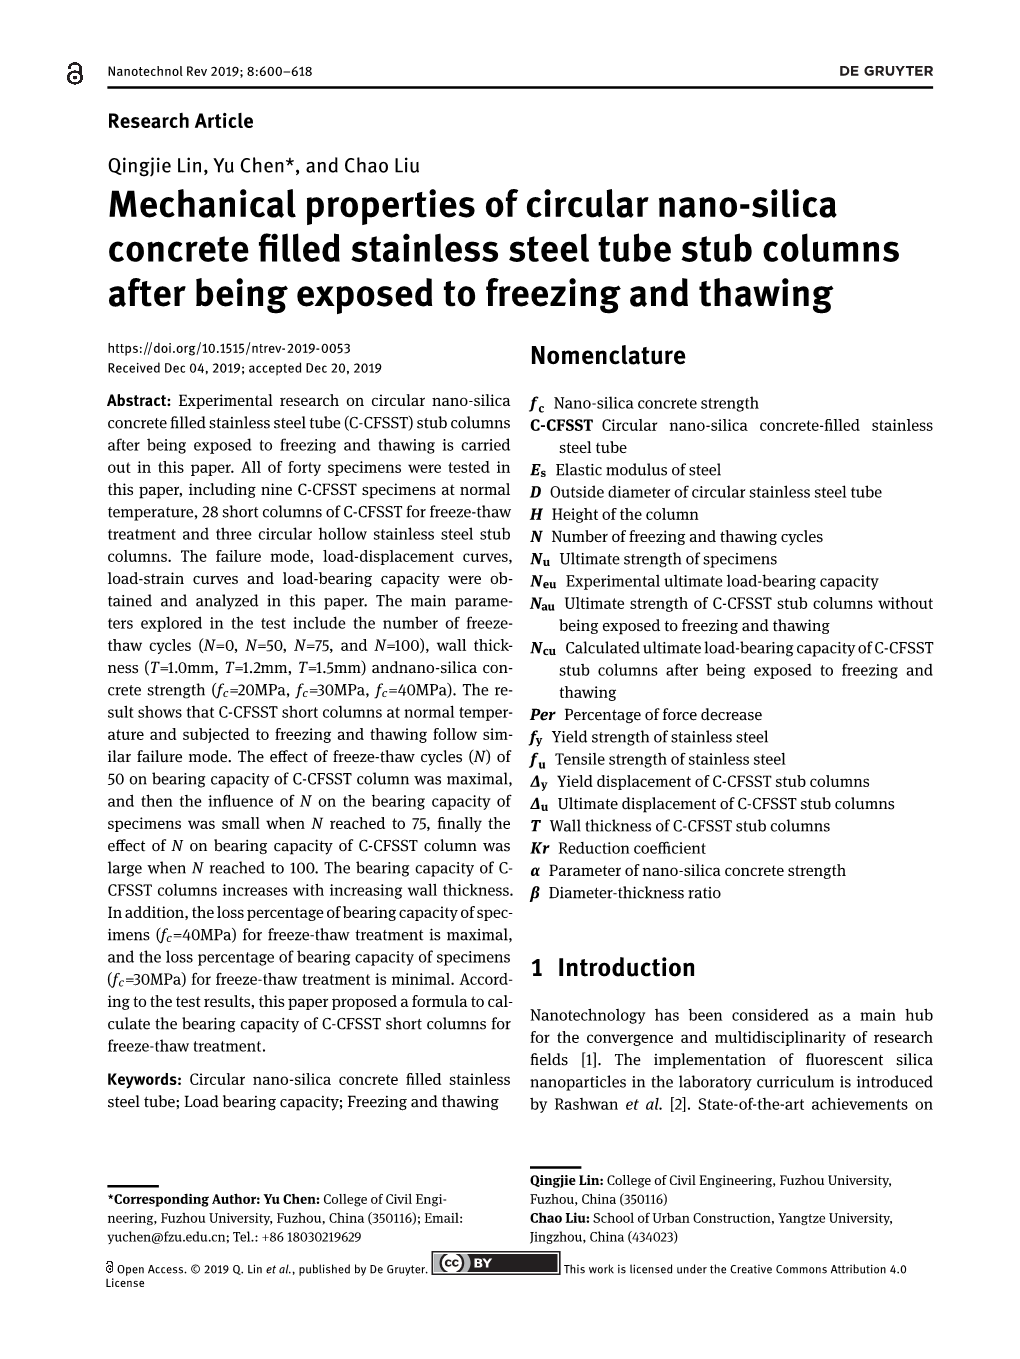 Mechanical Properties of Circular Nano-Silica Concrete Filled Stainless Steel Tube Stub Columns After Being